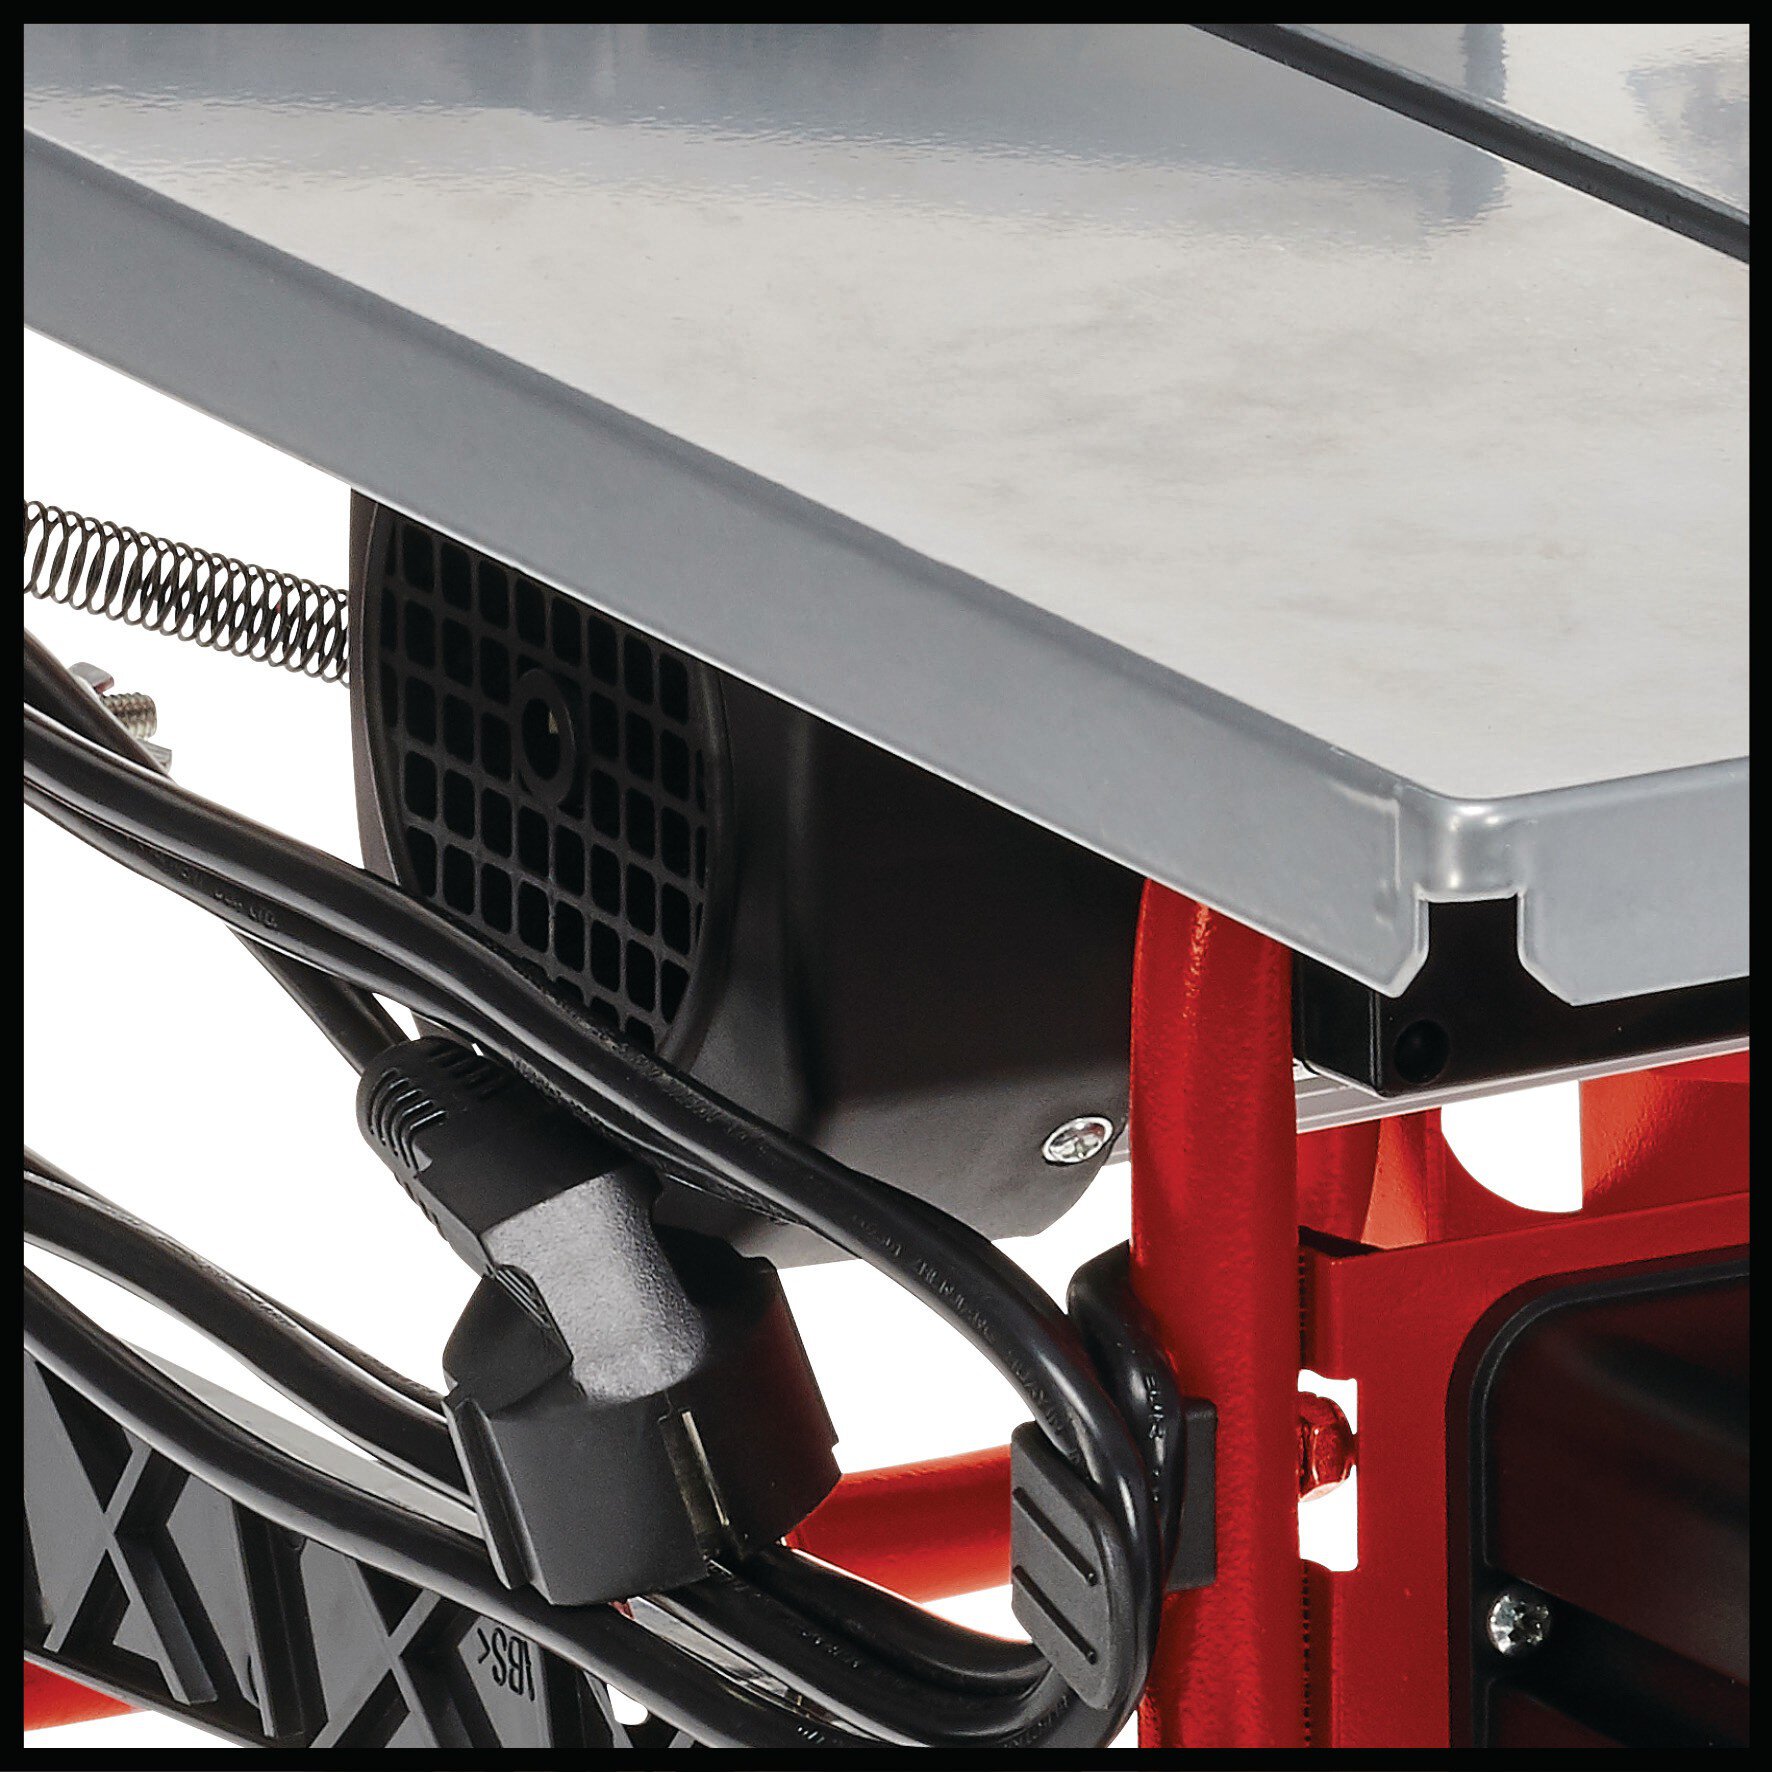 einhell-classic-table-saw-4340415-detail_image-003